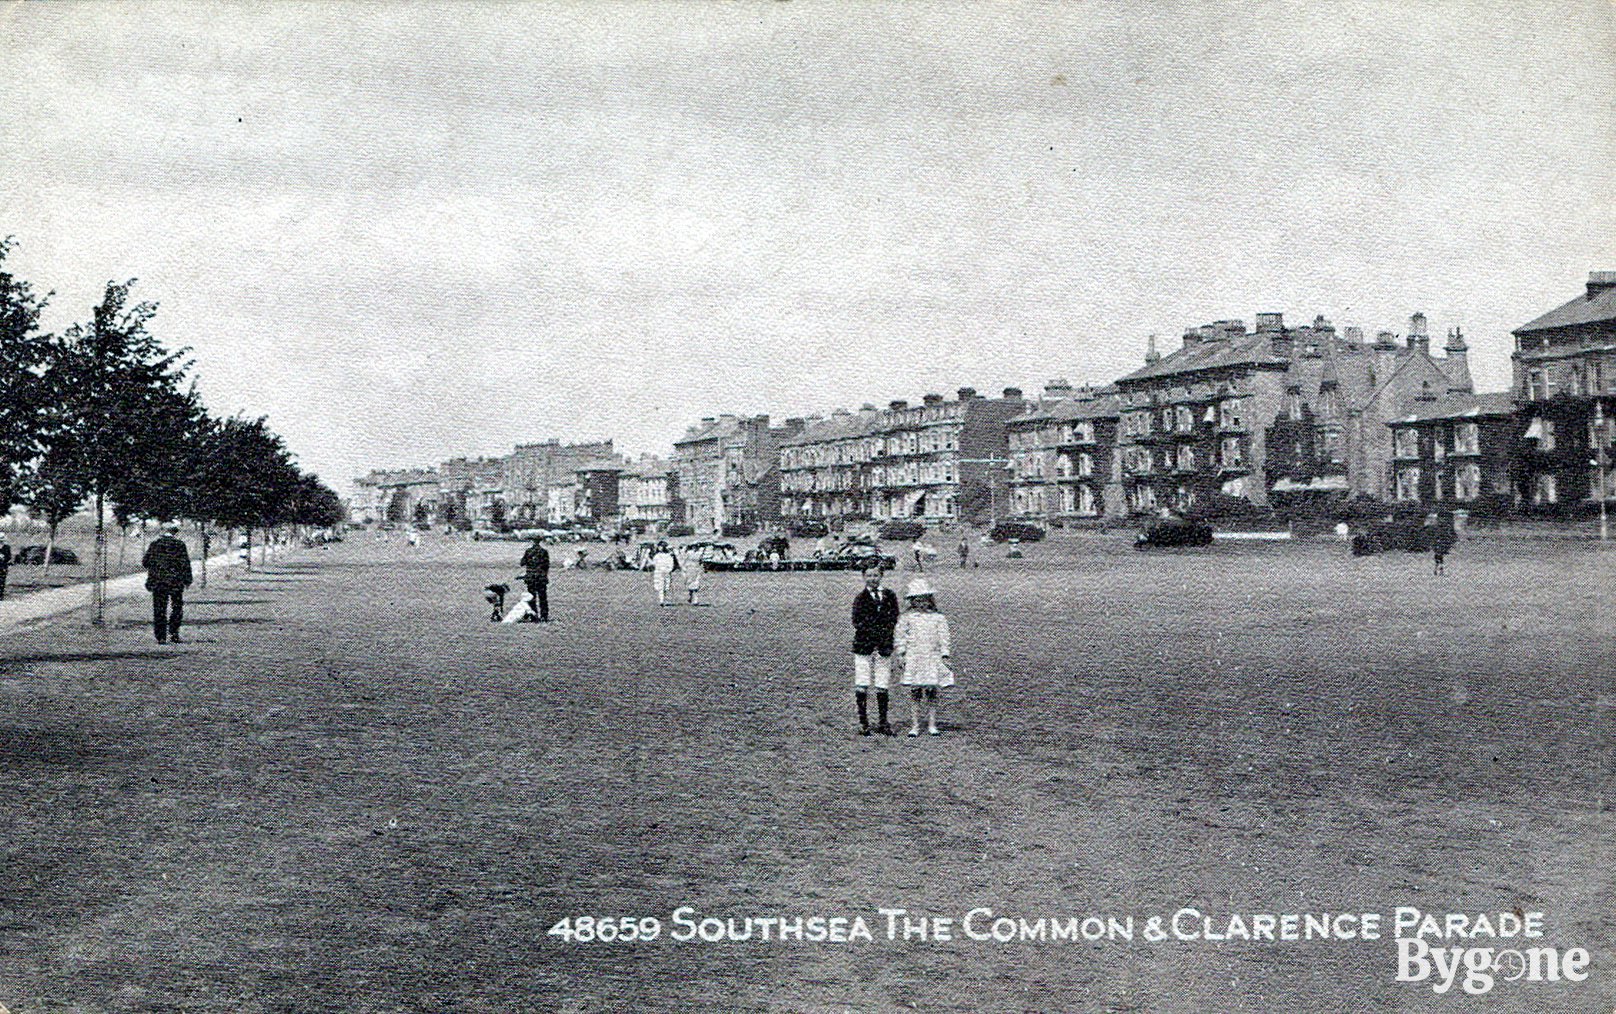 Southsea Common & Clarence Parade